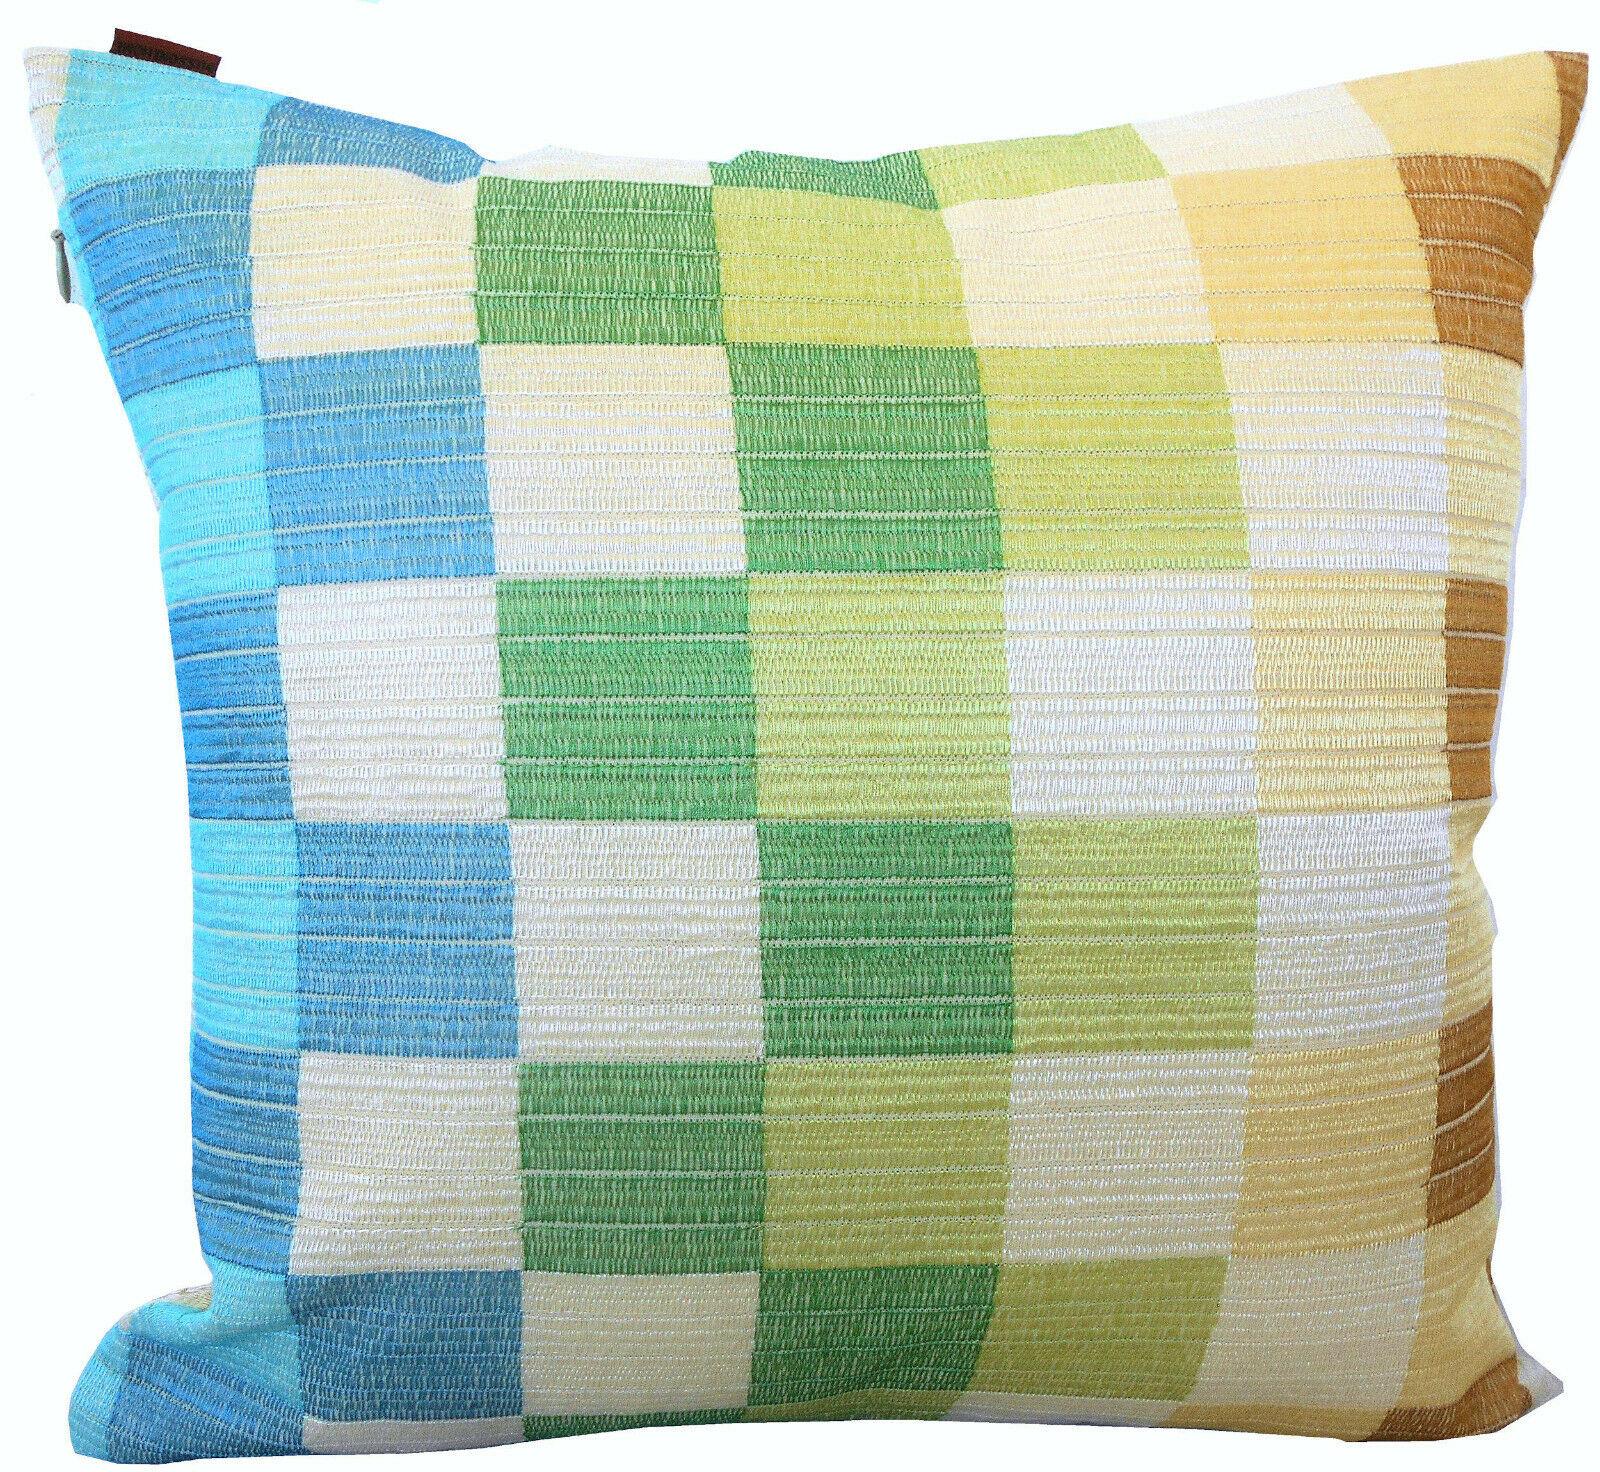 Missoni home cushion sham cover, drop-needle stitch, embroidered, 100% Cotton, “Iris” design, measures: 16” x 16” (40 x 40 cm), accepts 18” x 18” insert. Listing is for pair (set of 2).